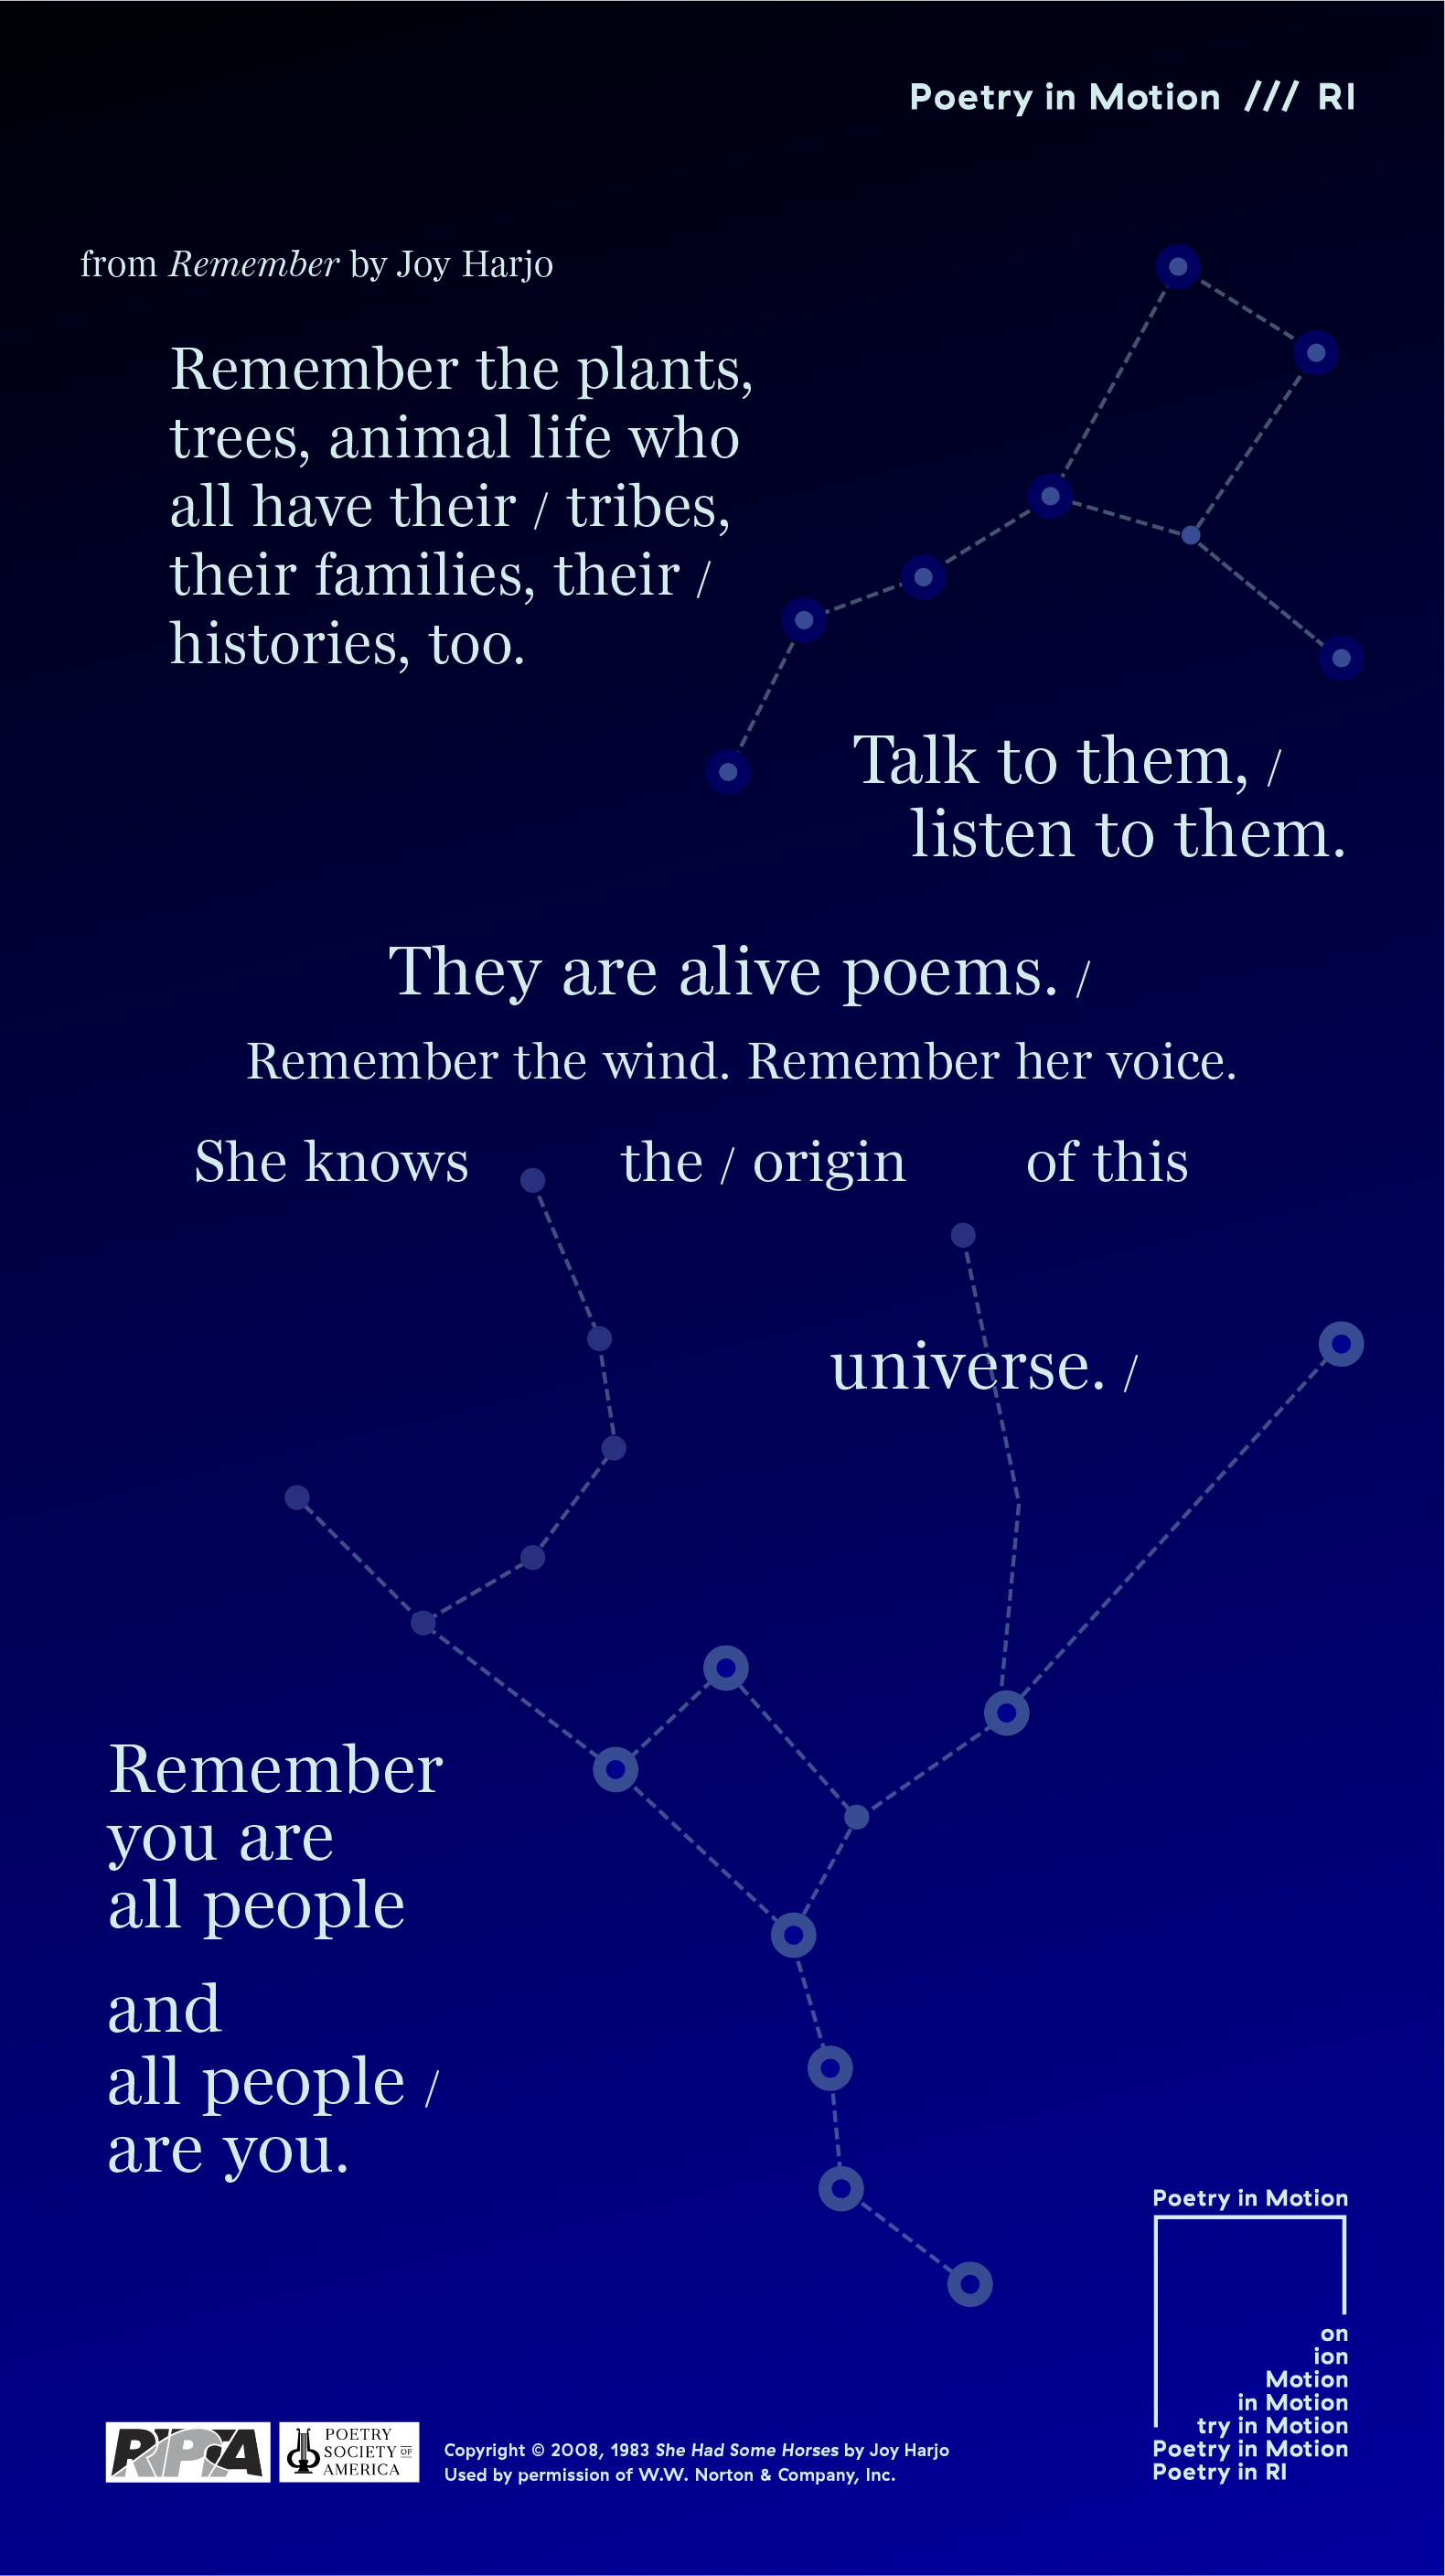 A poster in shades of blue depicts dots connected by dashed lines. An excerpt from the poem, Remember by Joy Harjo is written in white text.